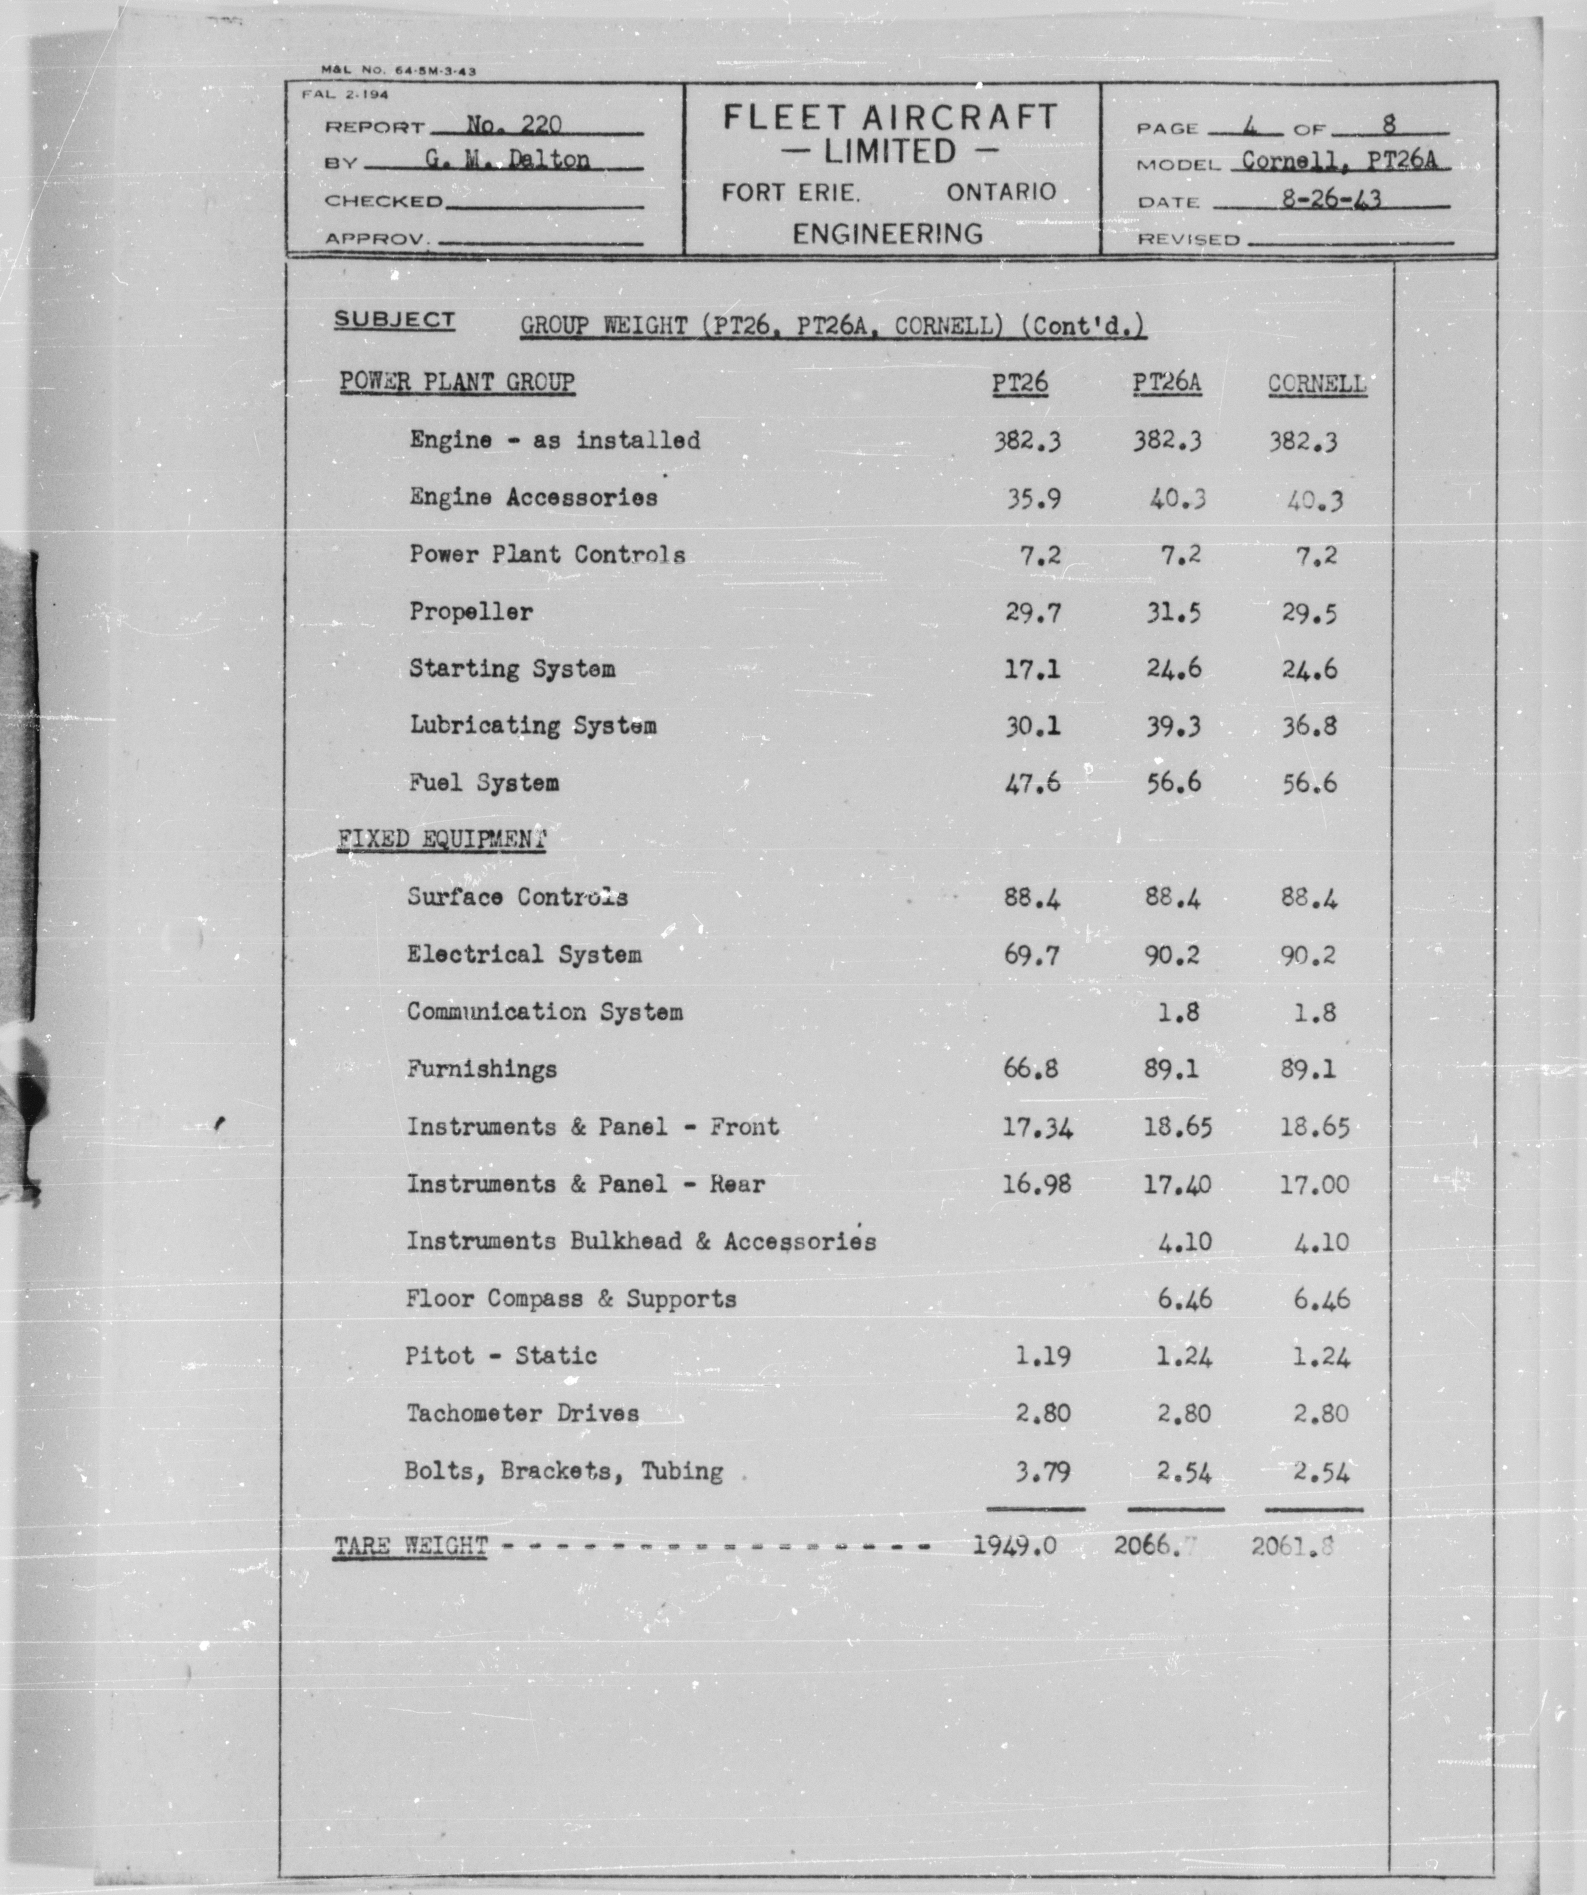 Sample page 4 from AirCorps Library document: Approved Tare Weight Modification for Cornell PT-26A